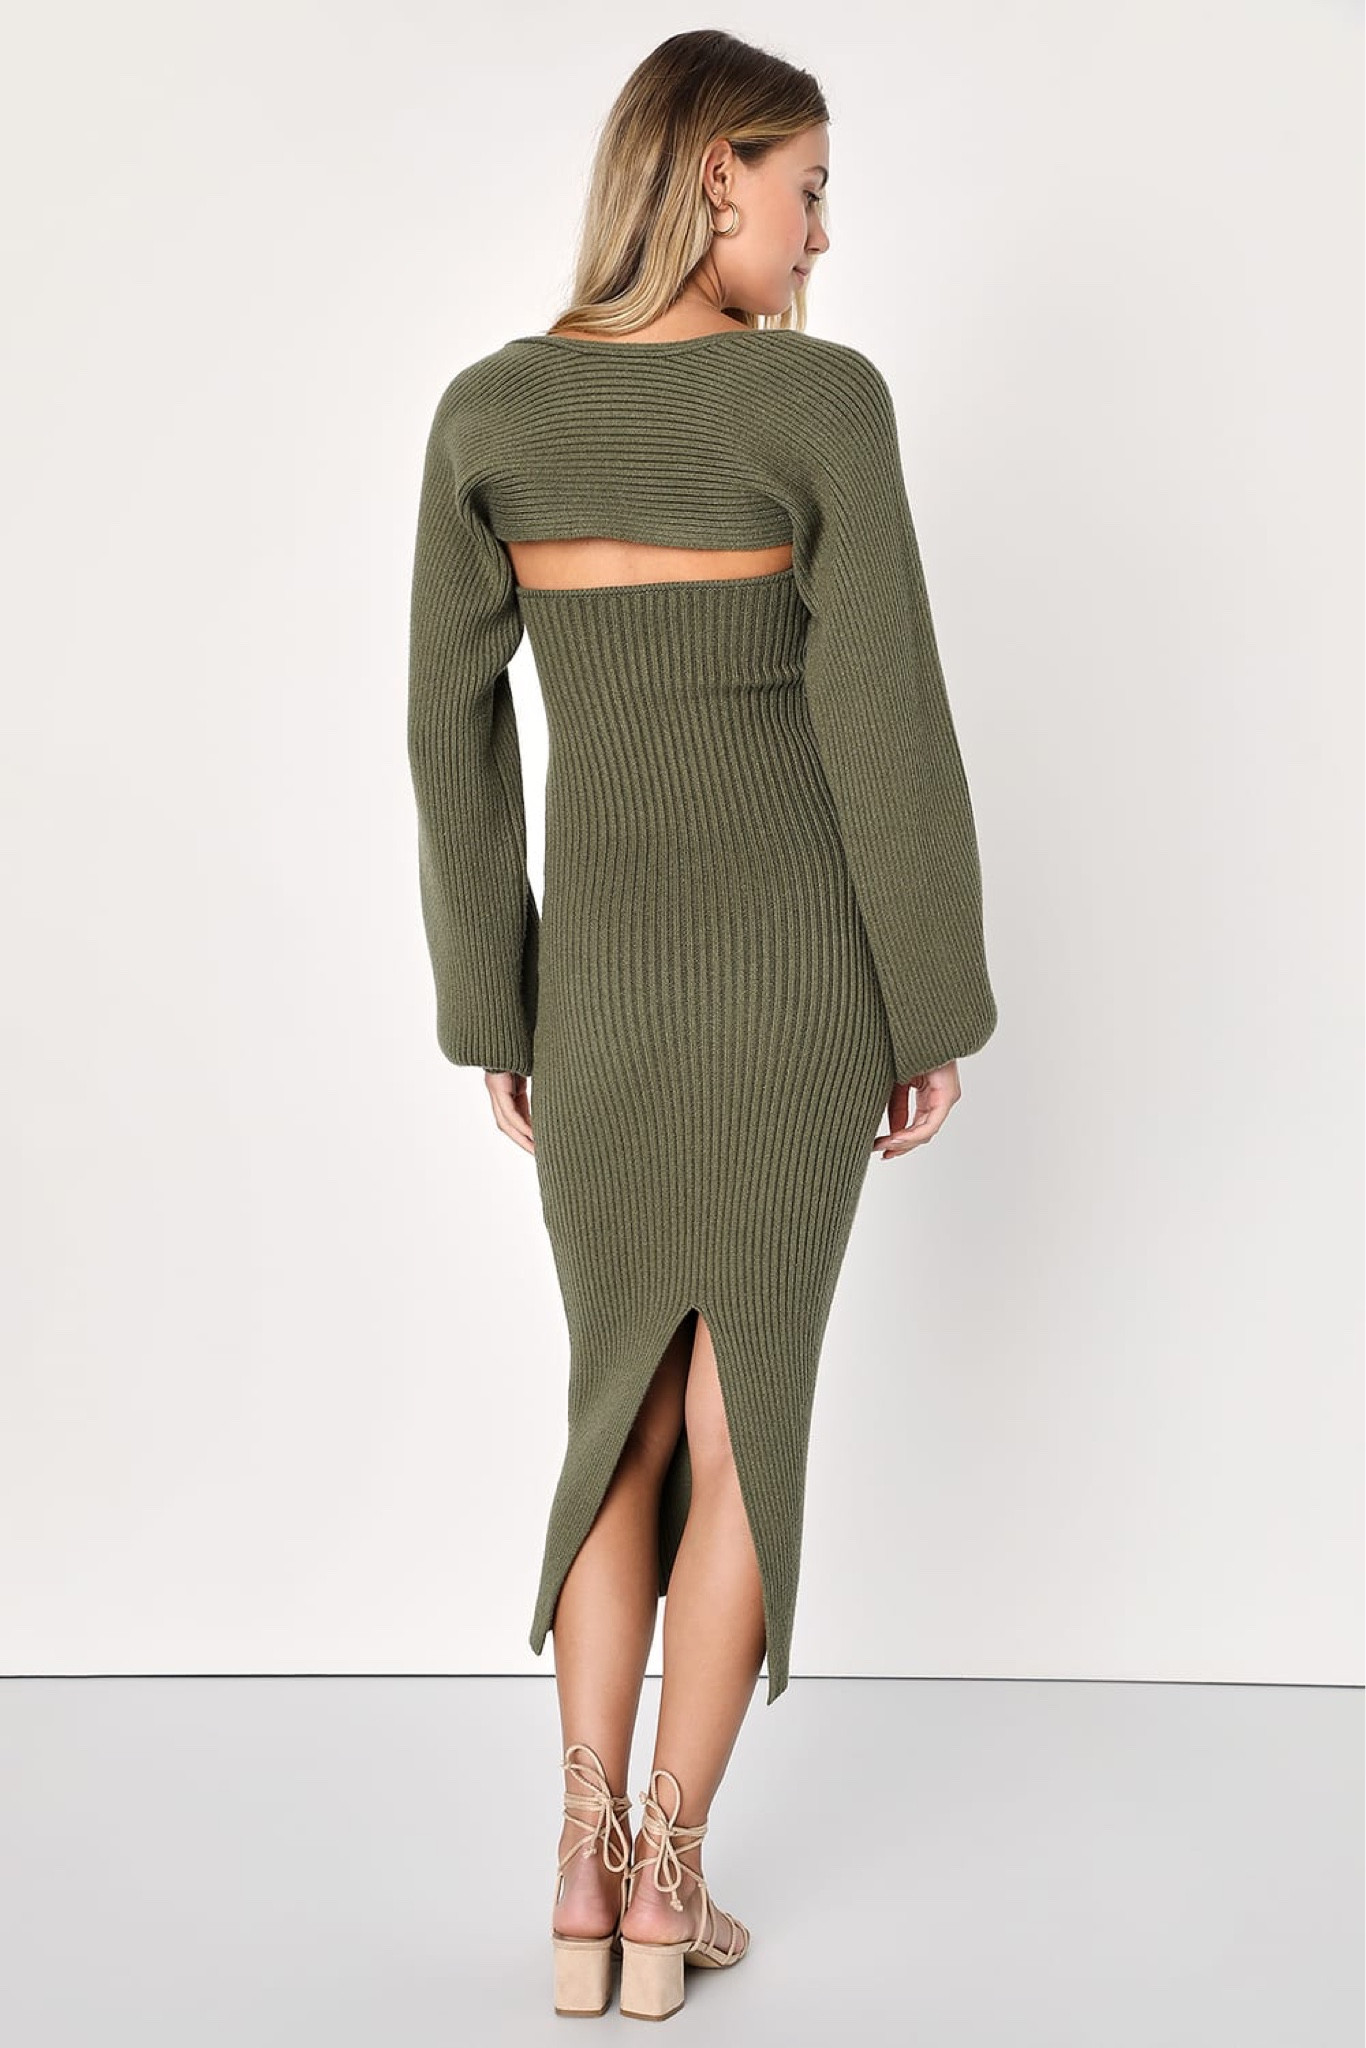 Simply Favored Olive Green Ribbed Long Sleeve Mini Dress